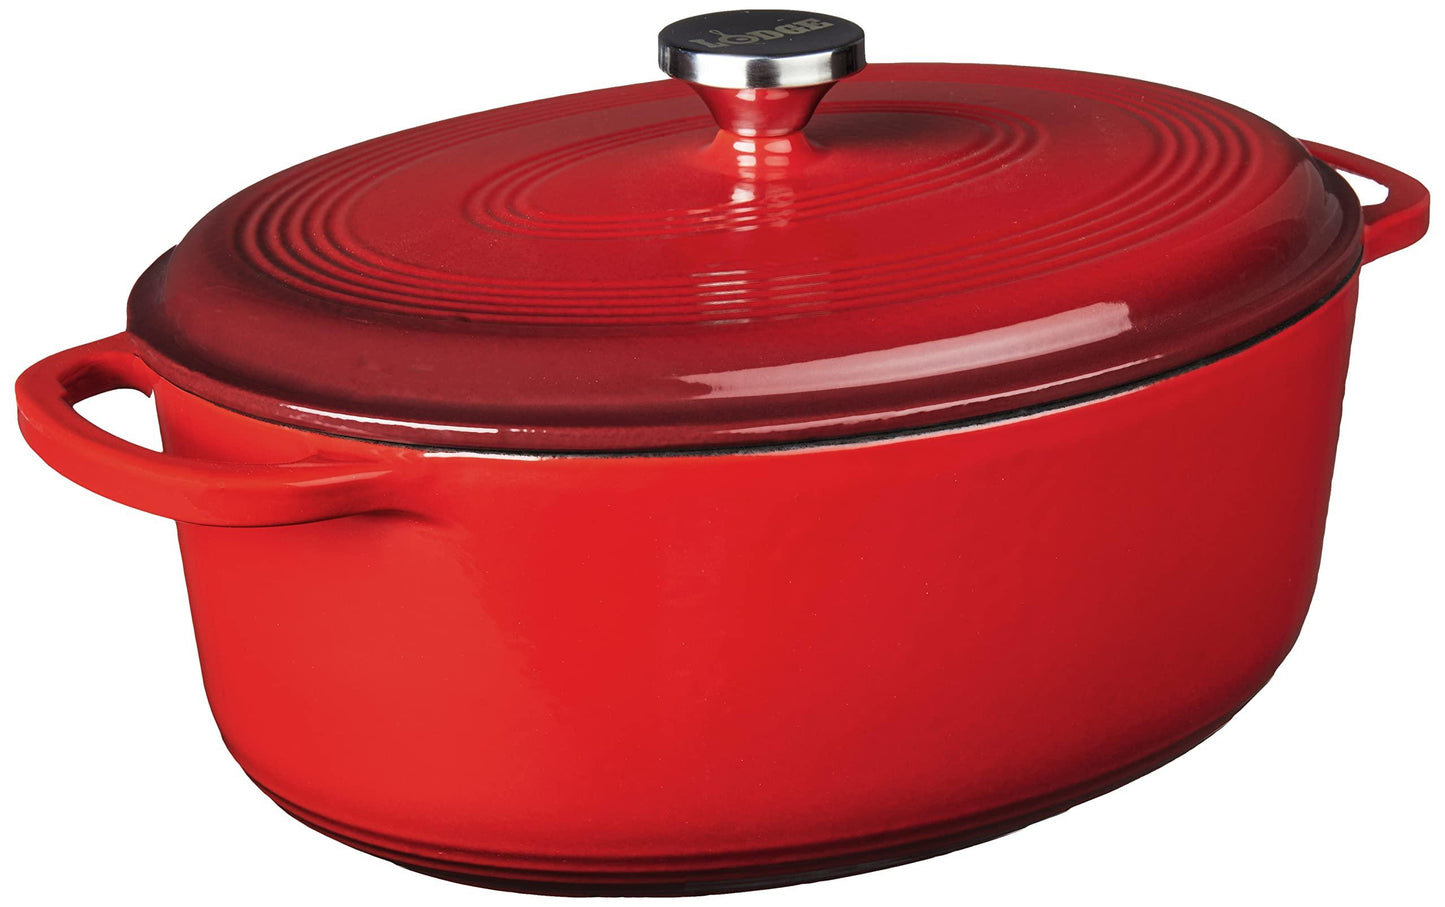 Lodge 7 Quart Enameled Cast Iron Dutch Oven with Lid – Dual Handles – Oven Safe up to 500° F or on Stovetop - Use to Marinate, Cook, Bake, Refrigerate and Serve – Red - CookCave